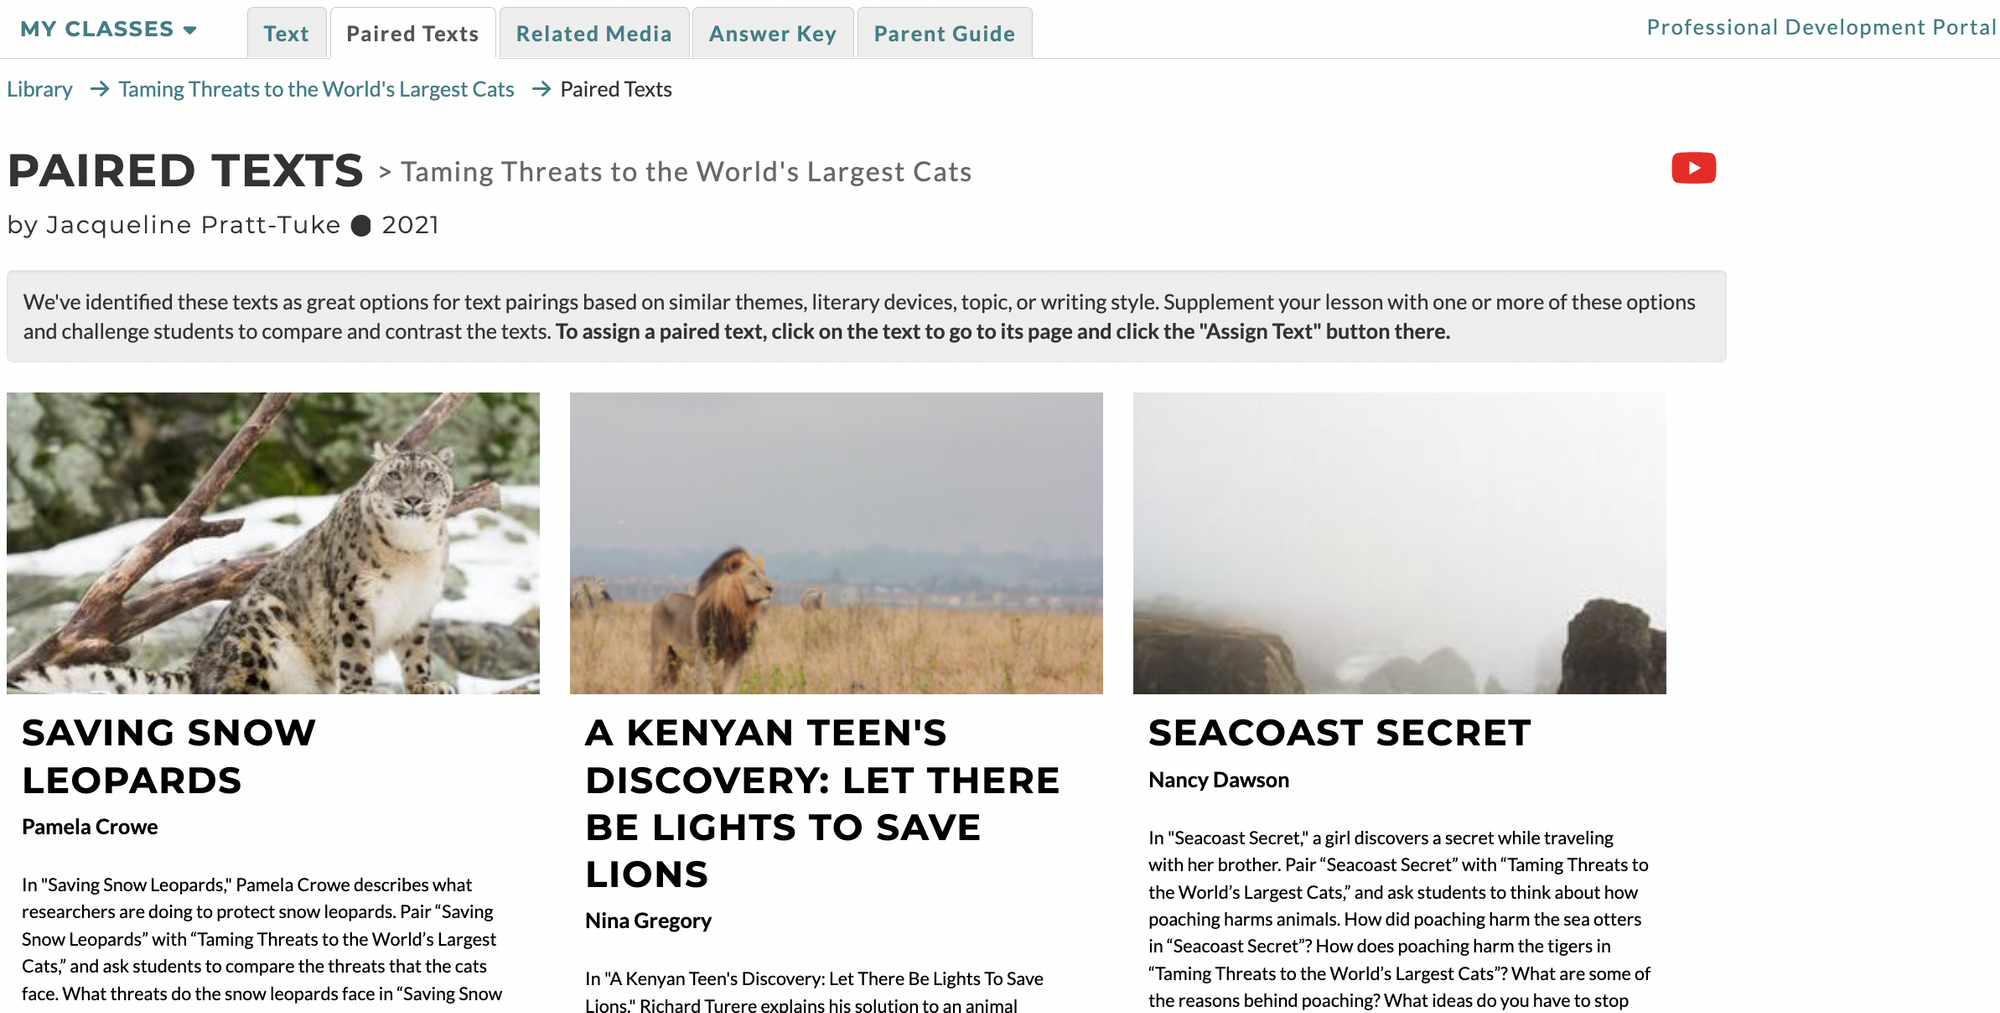 Screenshot of Paired Texts for CommonLit text "Taming Threats to the World's Largest Cats"